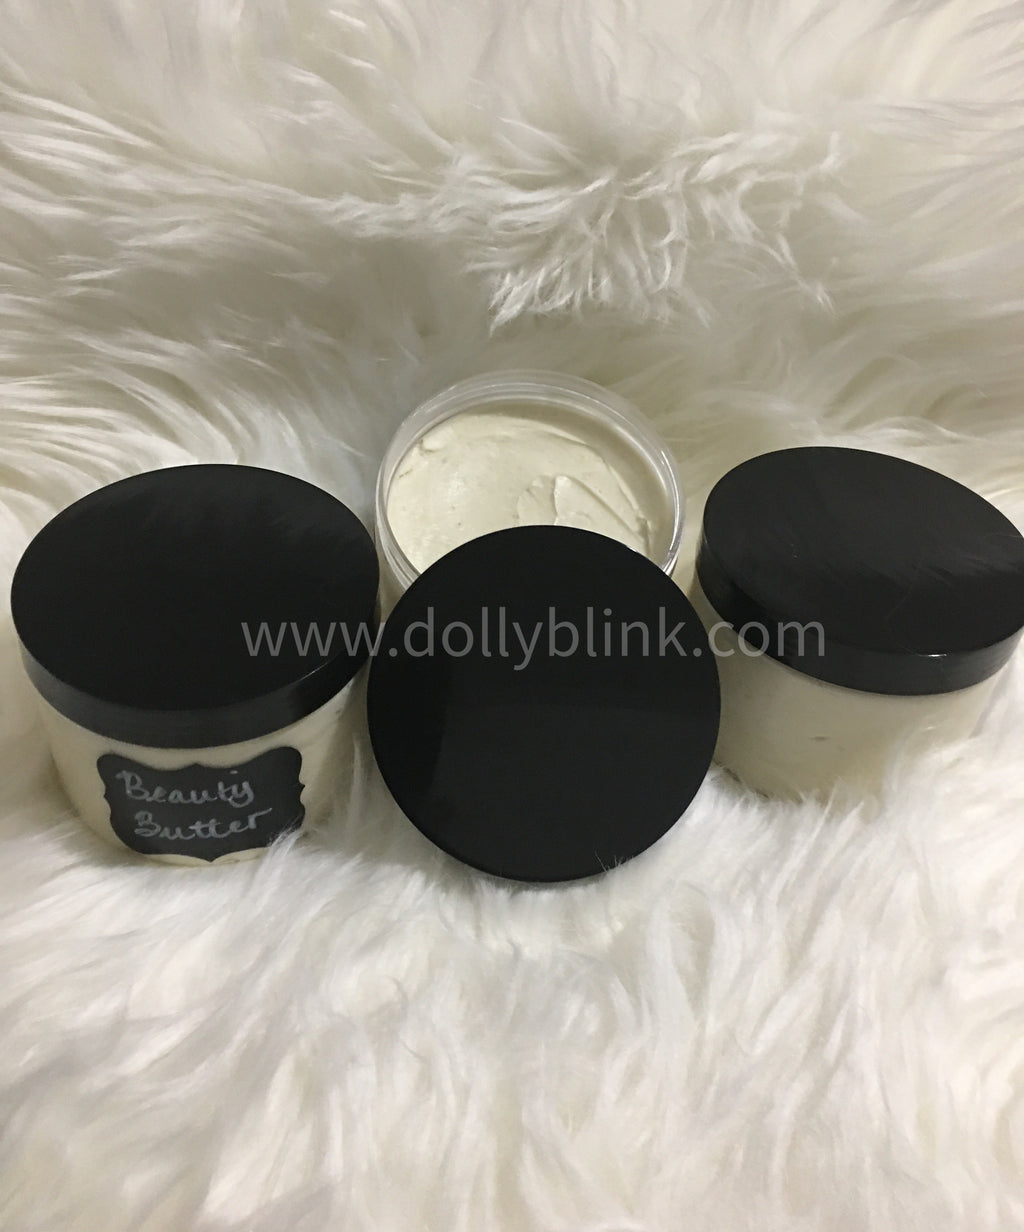 Coco-Pine Beauty Butter